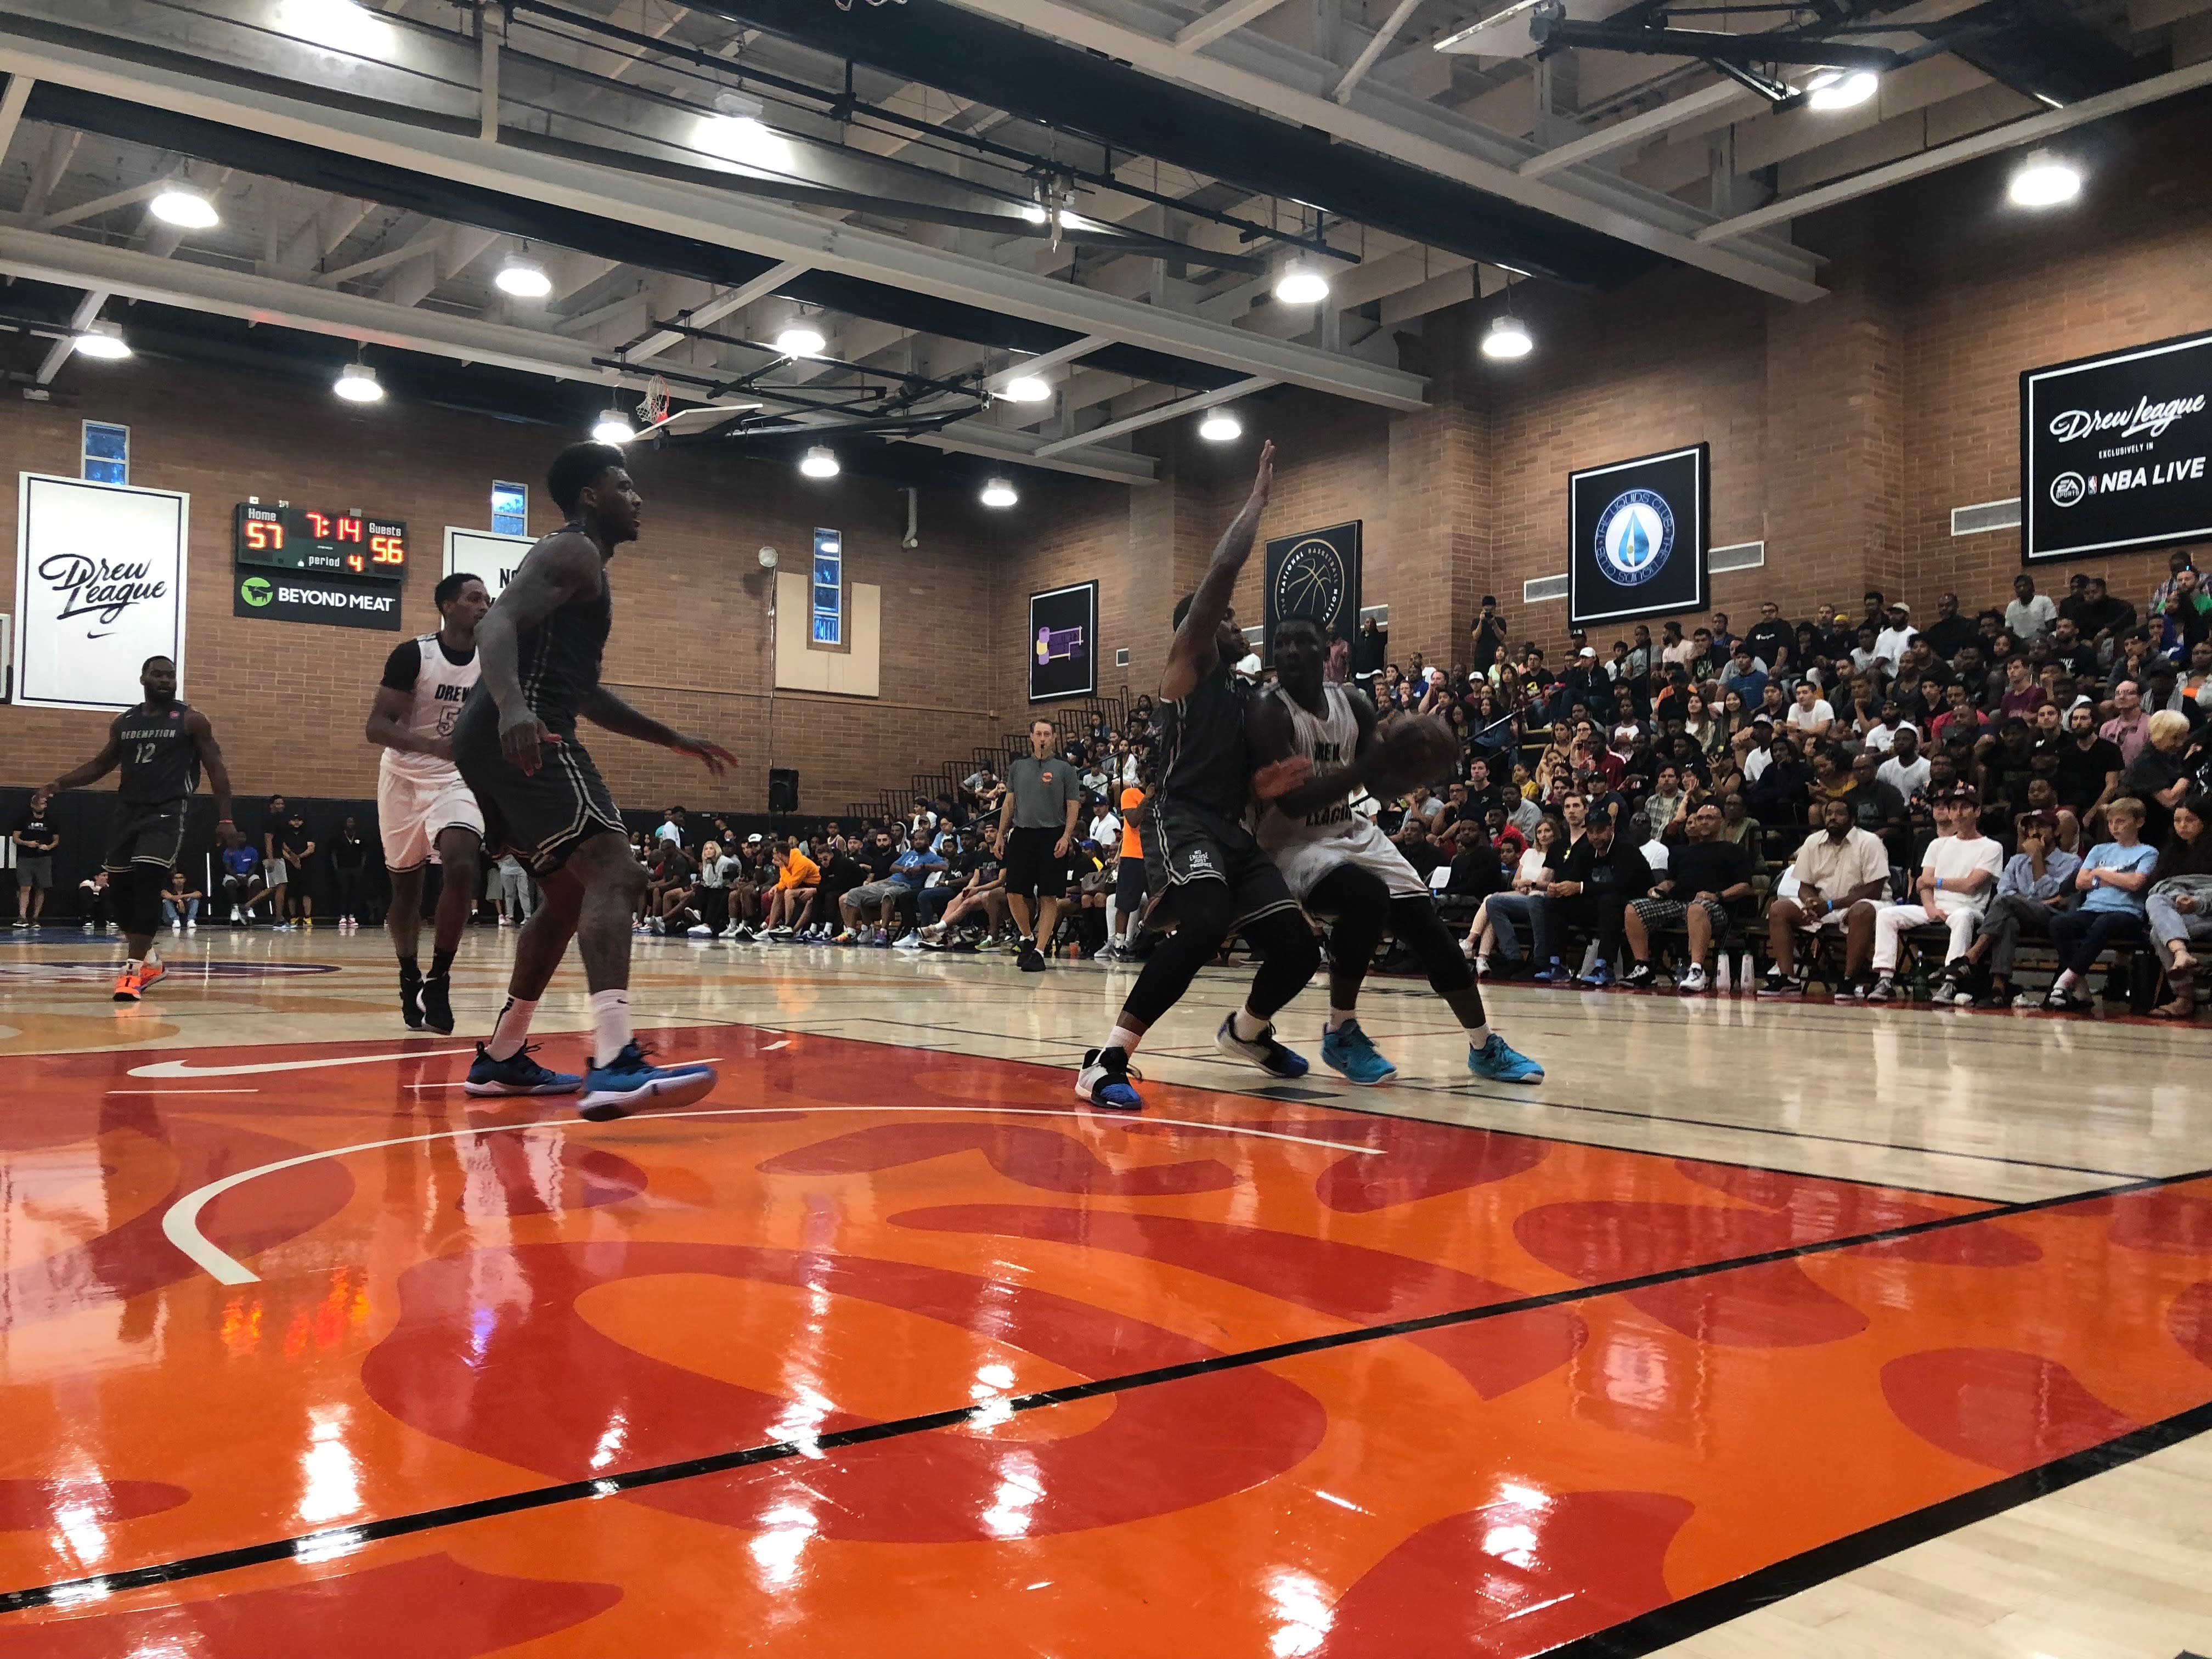 The people and action is what makes the Drew League